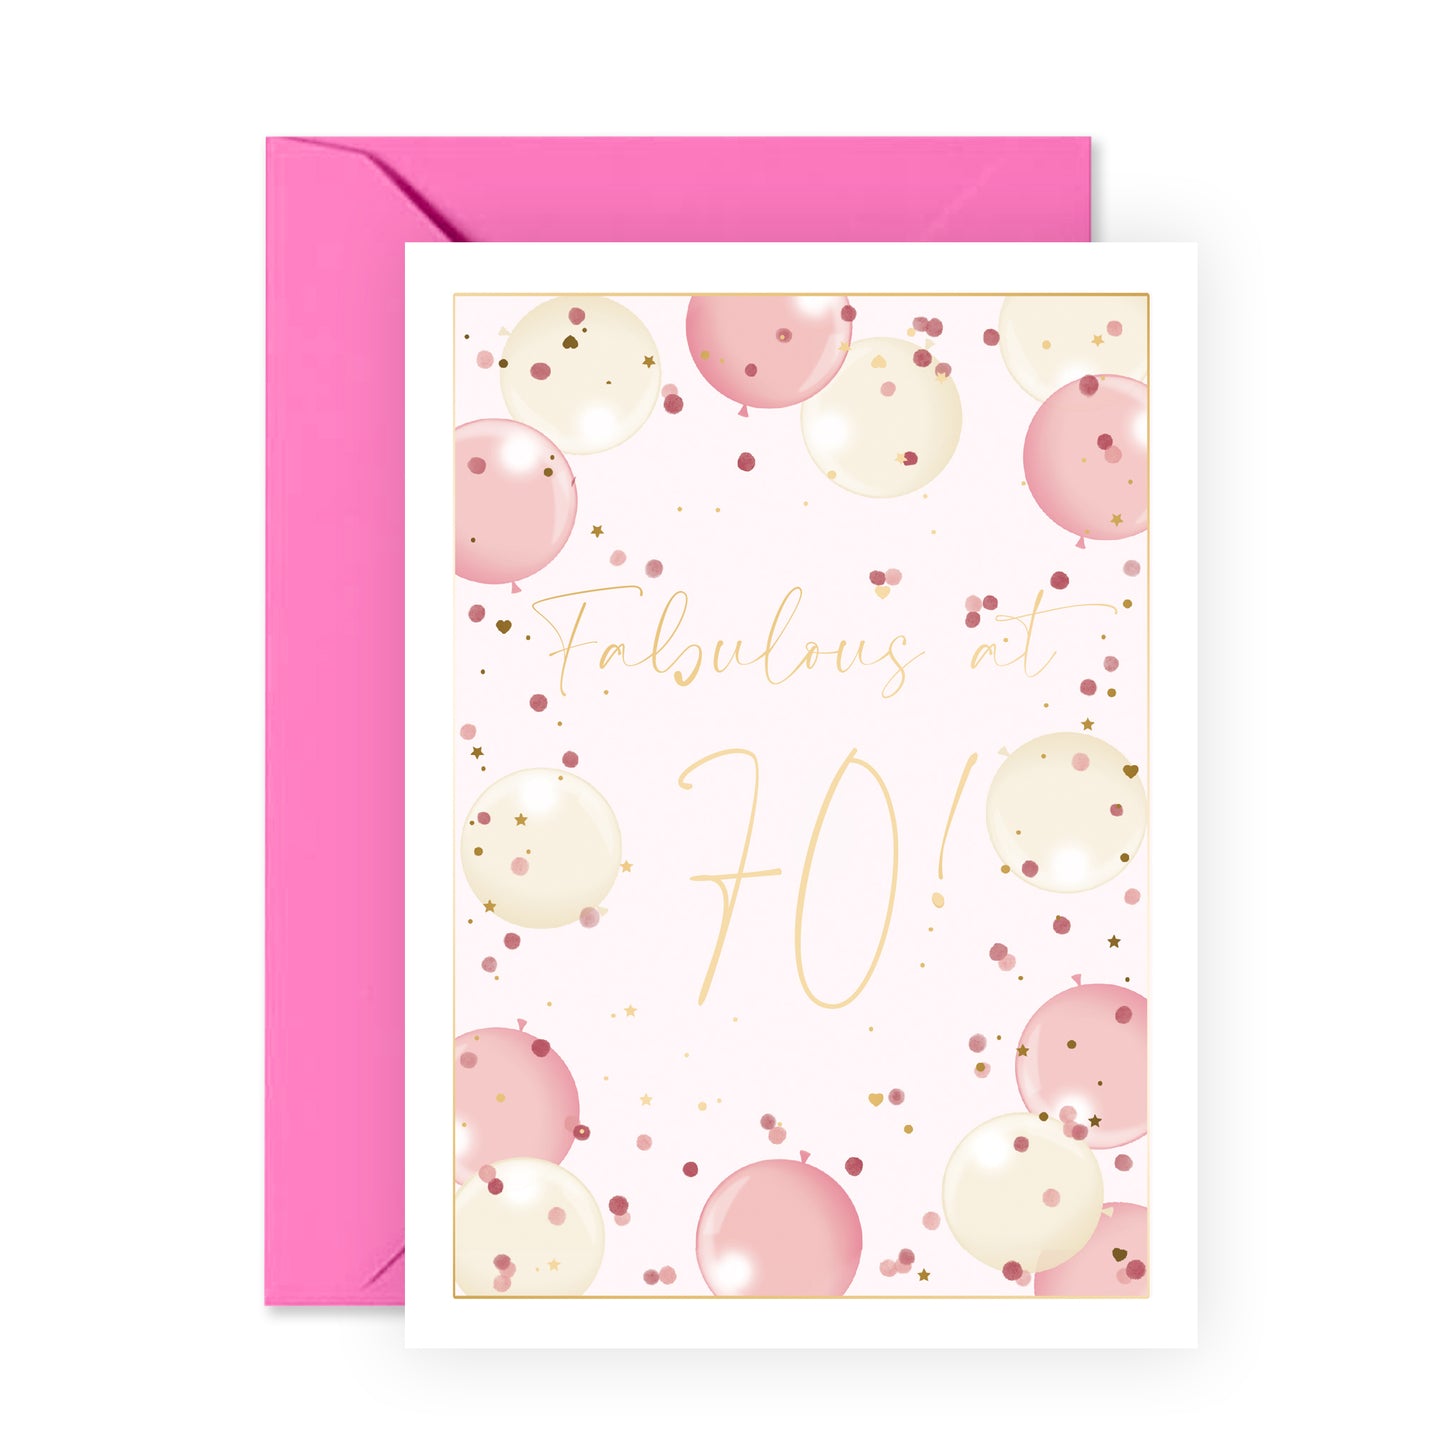 70th Birthday Card - Fabulous at 70 - For Women Friends Her